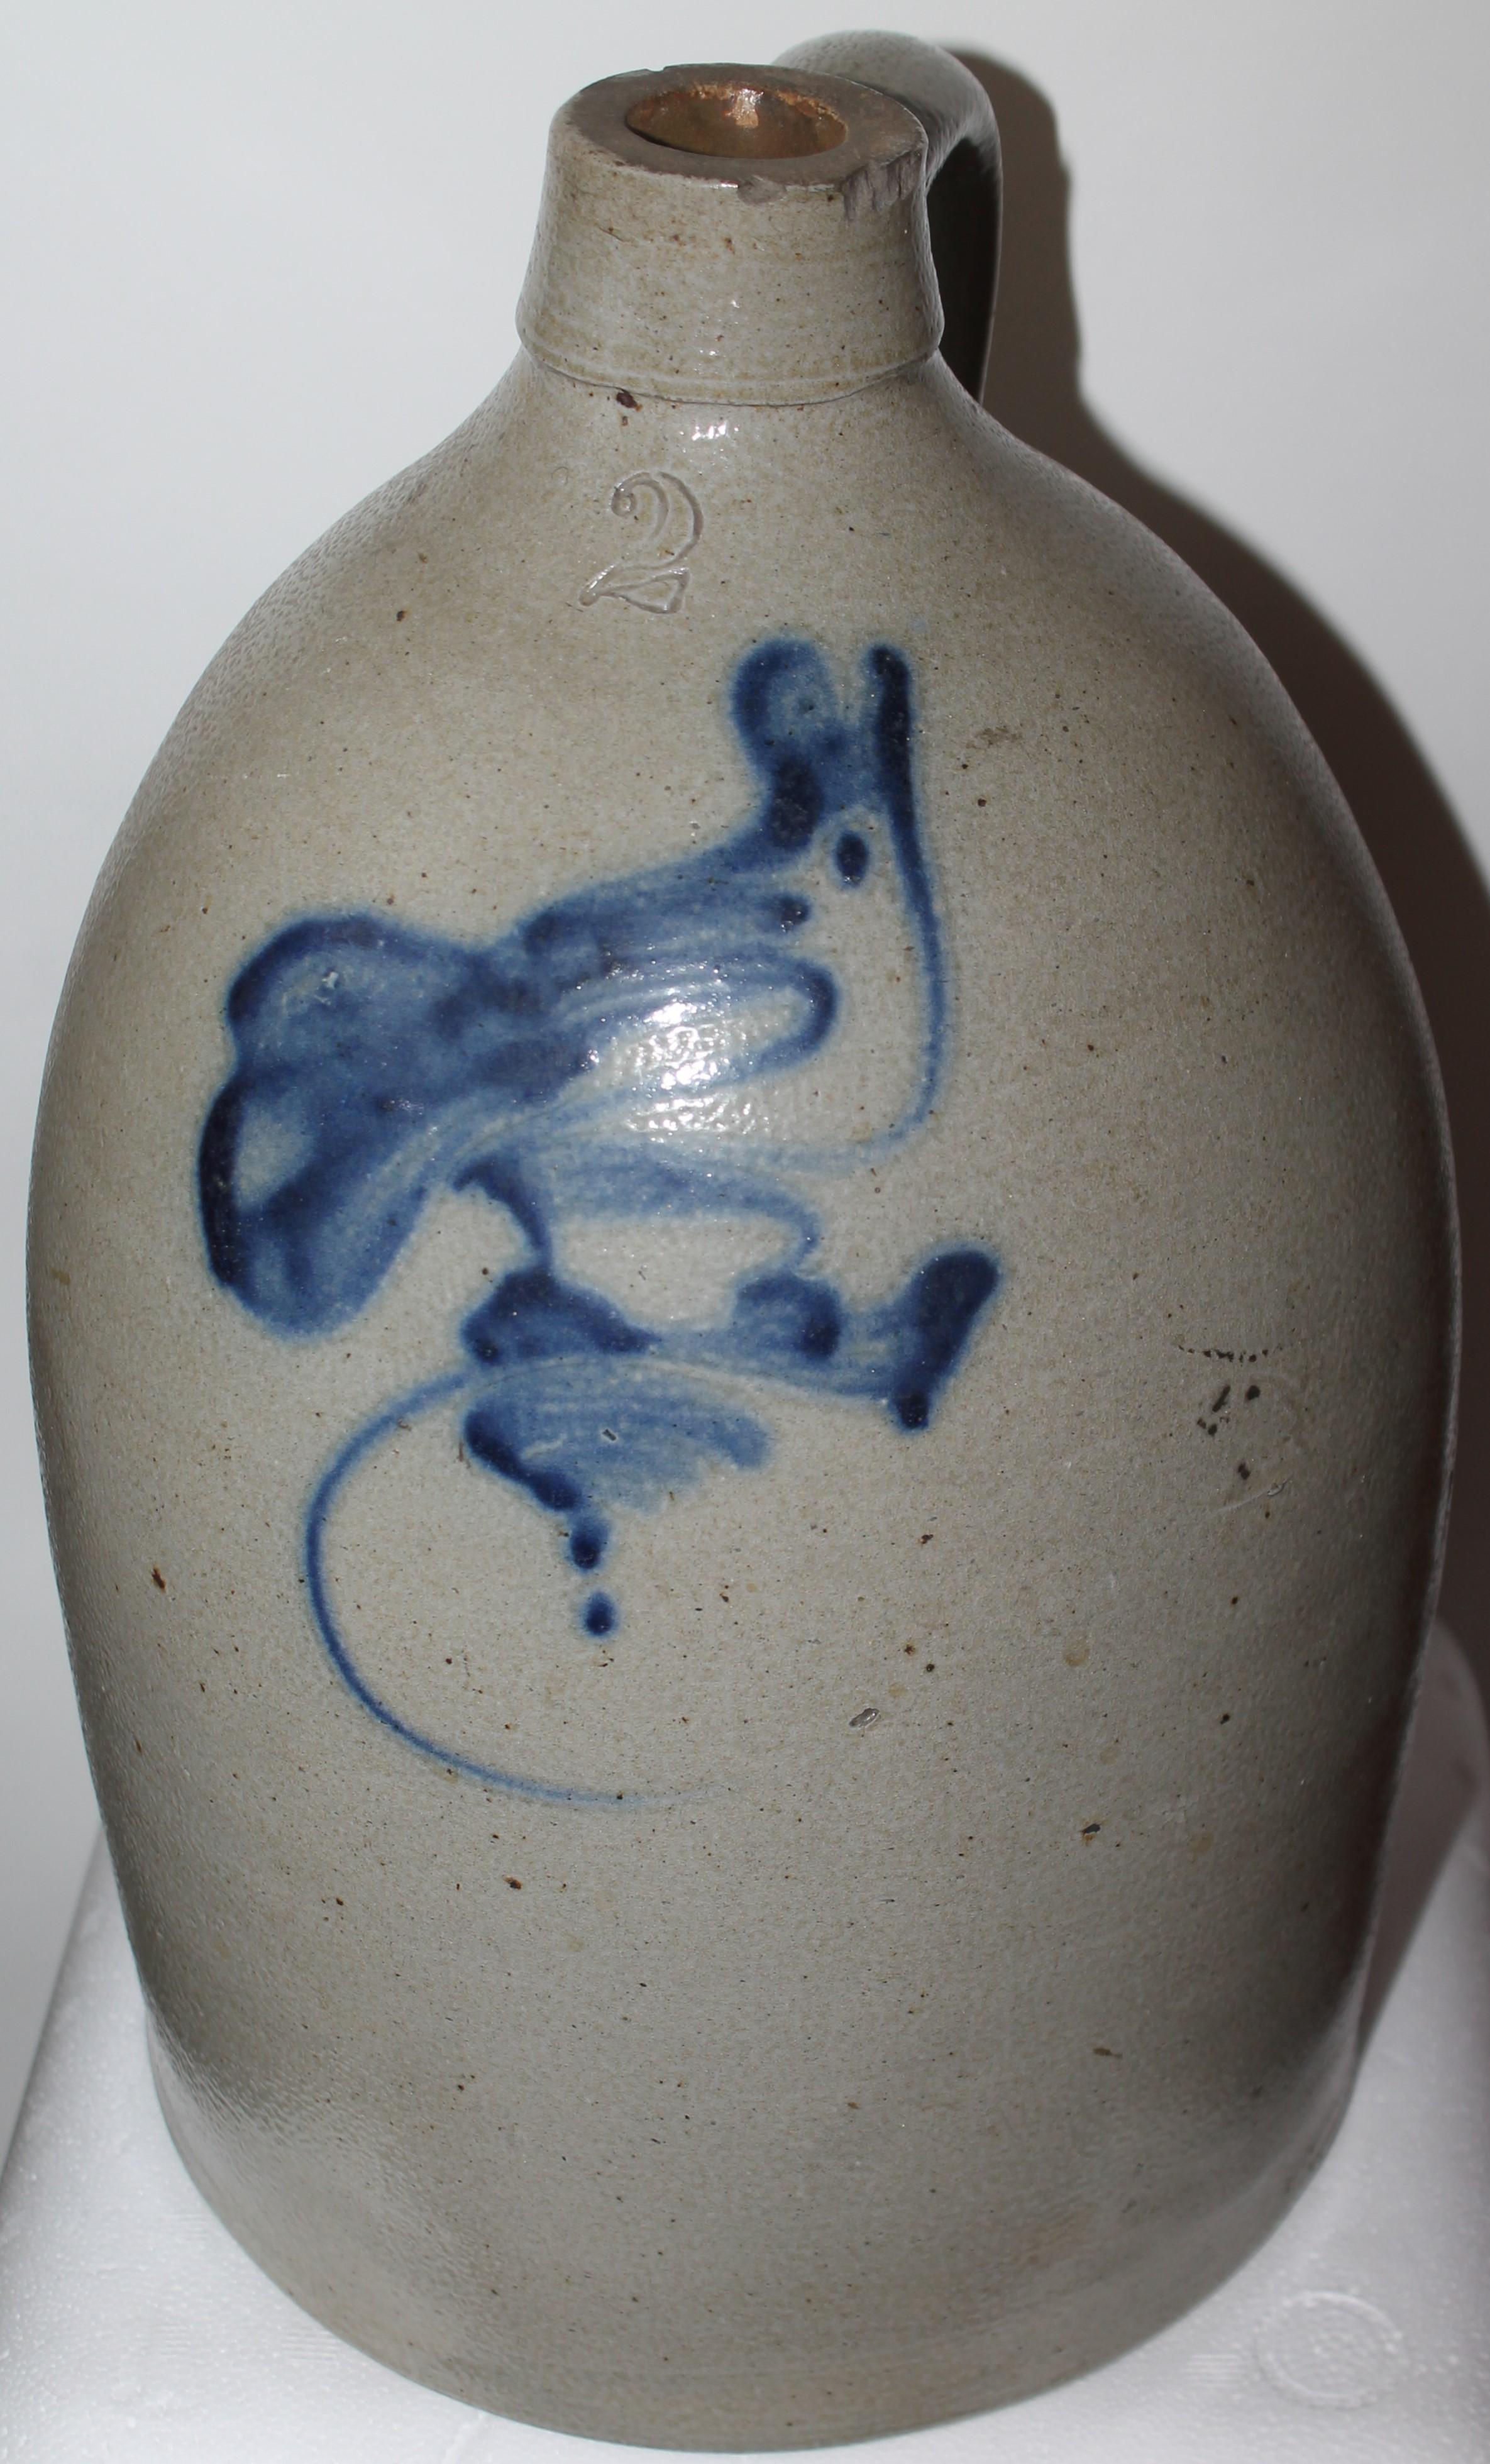 19th century decorated stoneware jug with a bird on the face. This is a New York State jug. The condition is very good.